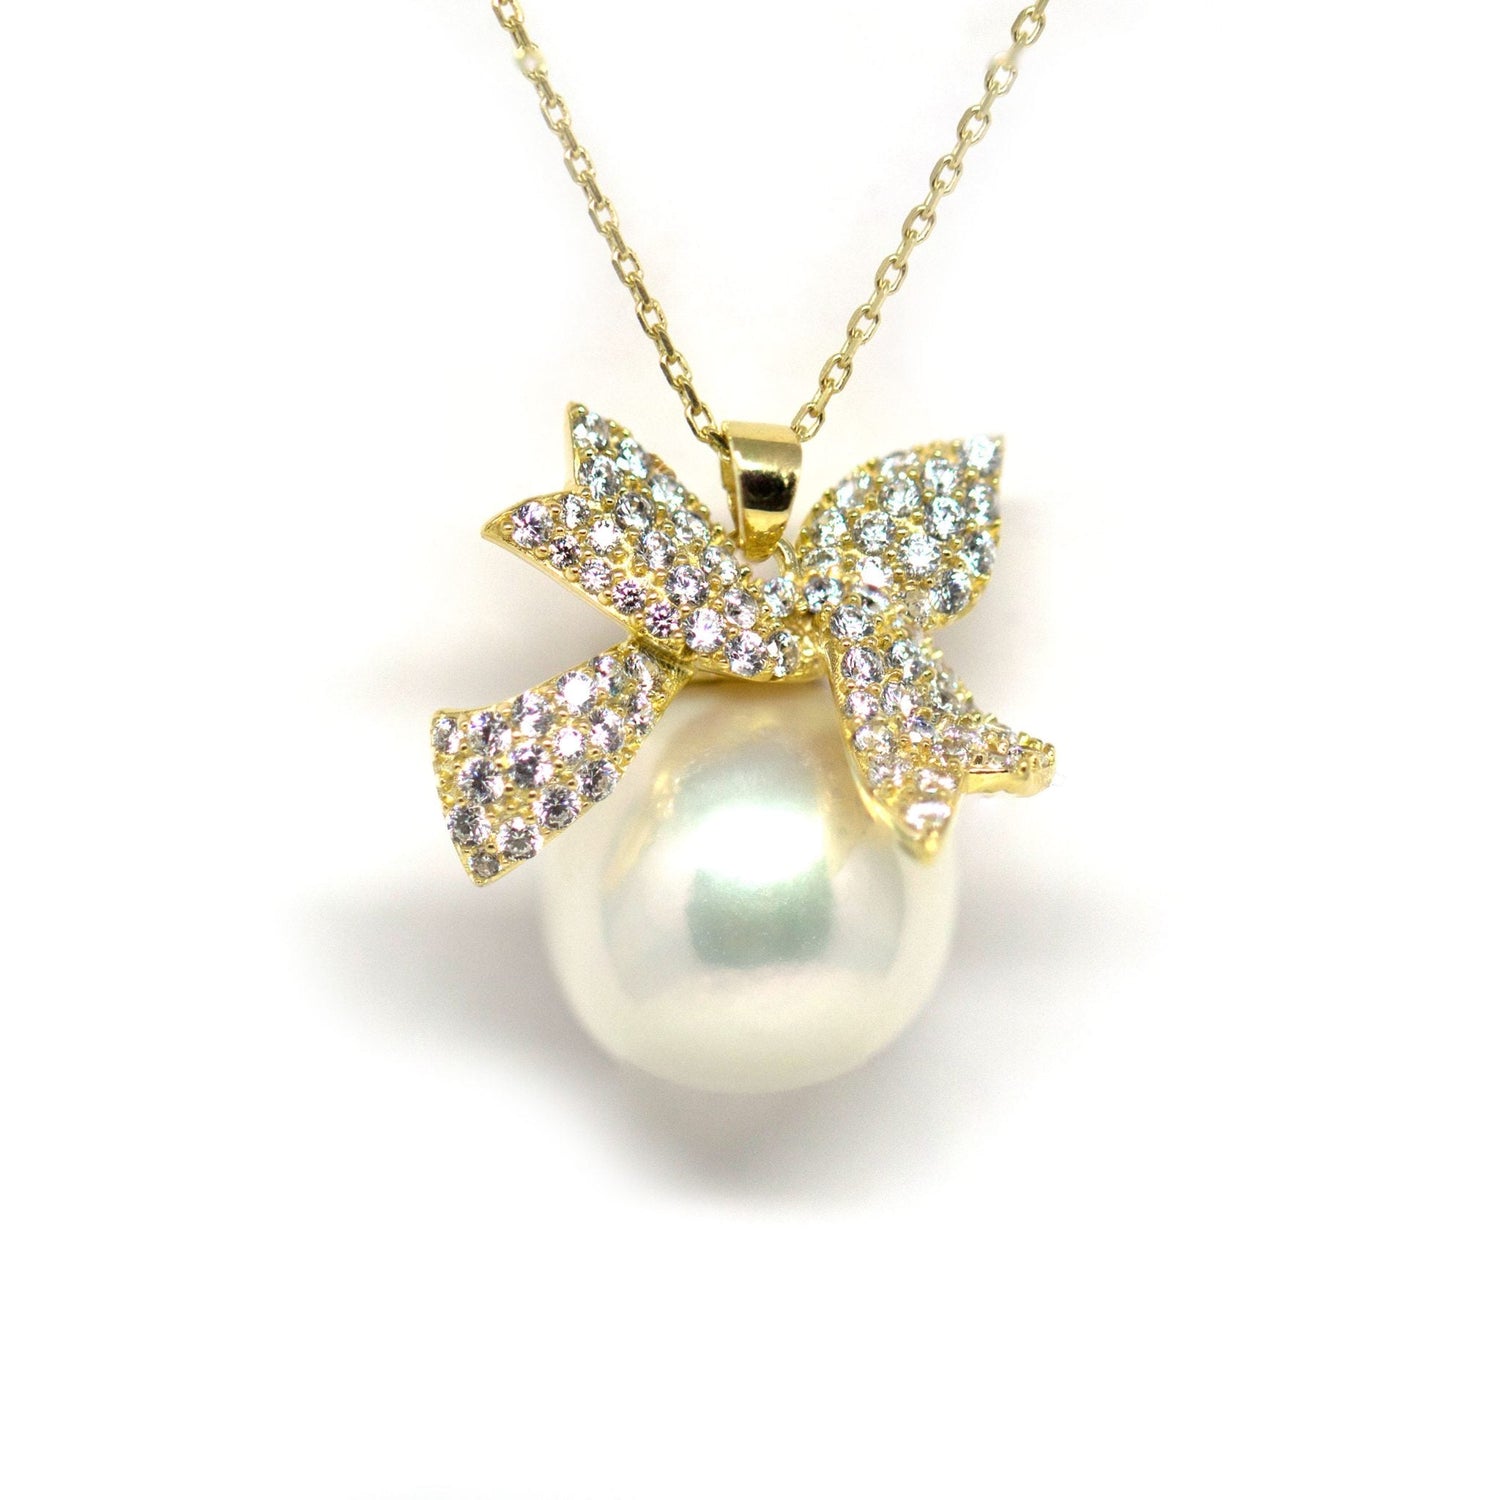 Golden Knot Edison Pearl Necklace - Timeless Pearl